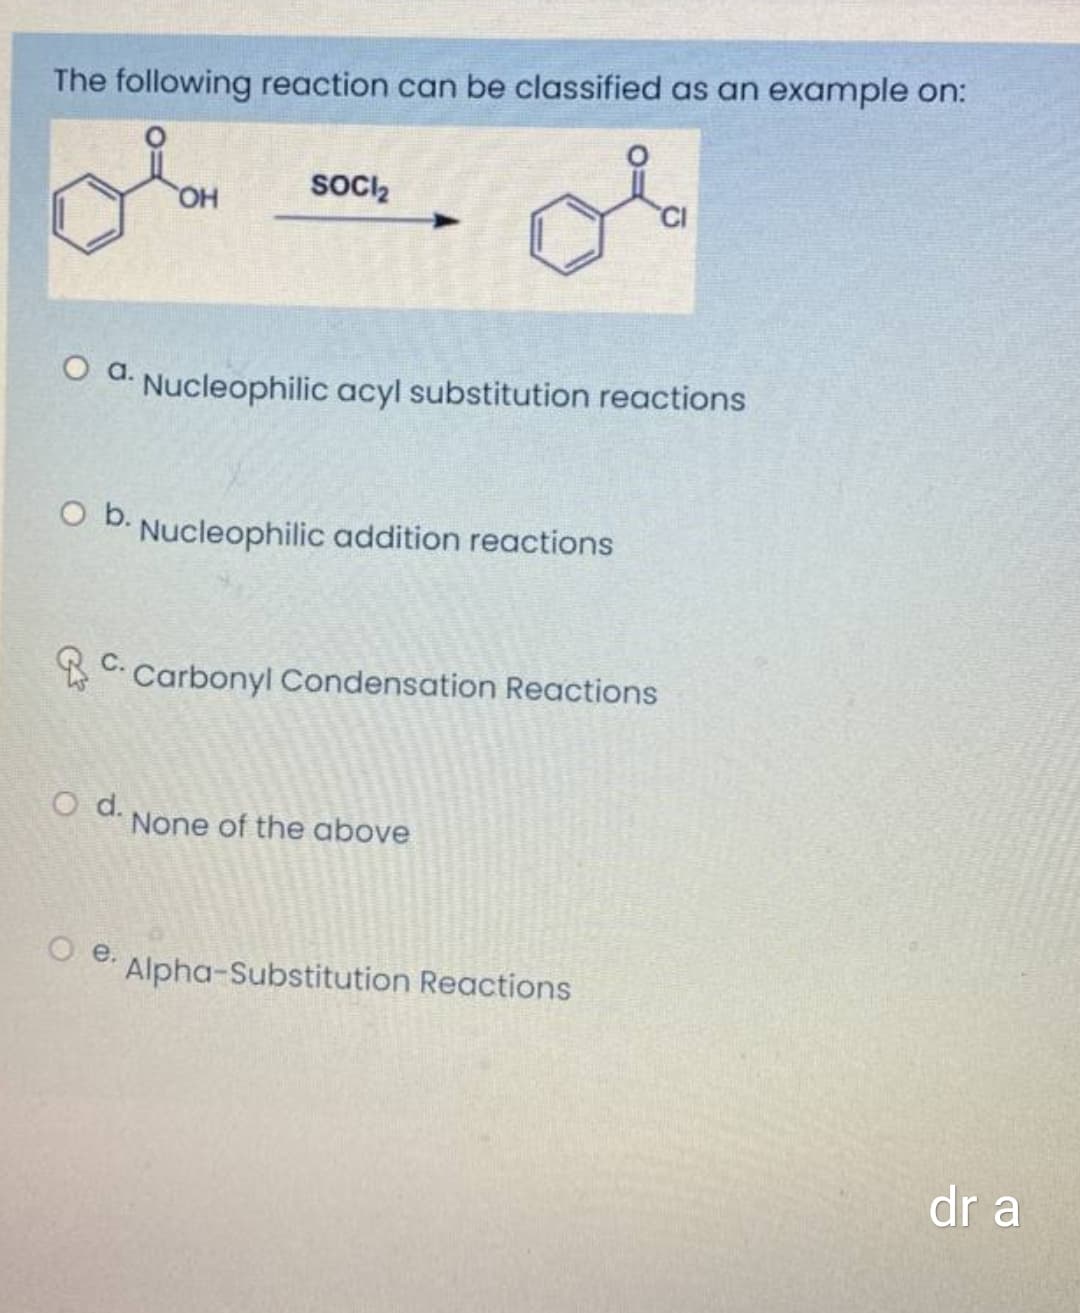 The following reaction can be classified as an example on:
SOocIz
HO
a.
Nucleophilic acyl substitution reactions
Ob.
Nucleophilic addition reactions
С.
Carbonyl Condensation Reactions
O d.
None of the above
O e.
Alpha-Substitution Reactions
dr a
